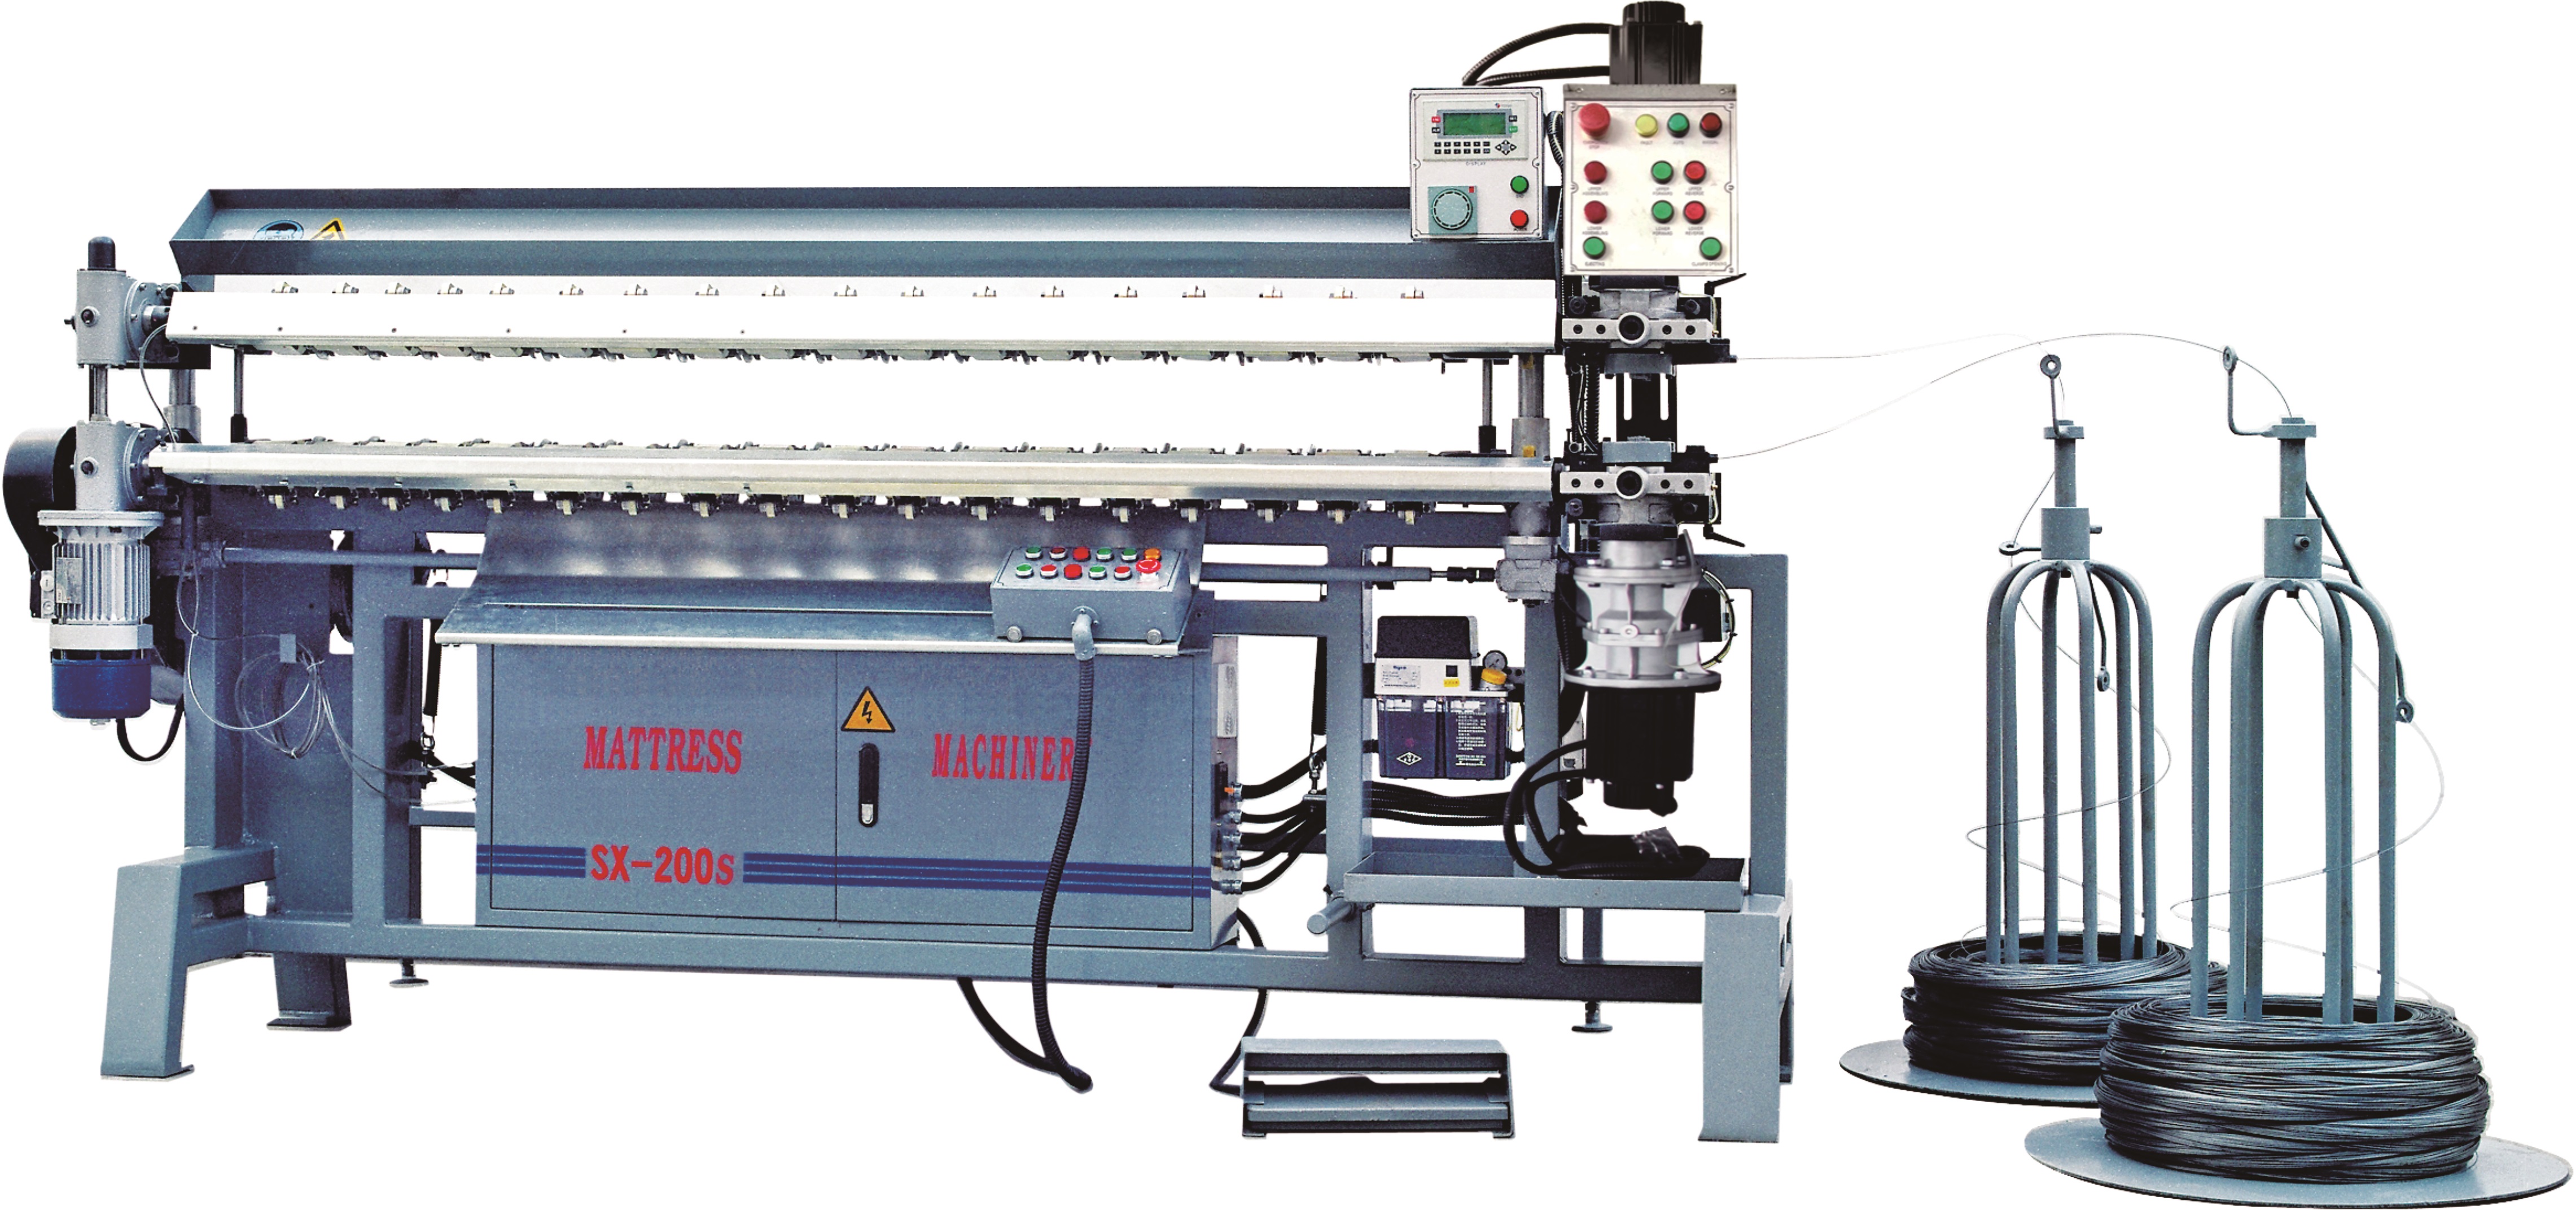 SX-200s AUTOMATIC SPRING ASSEMBLING MACHINE